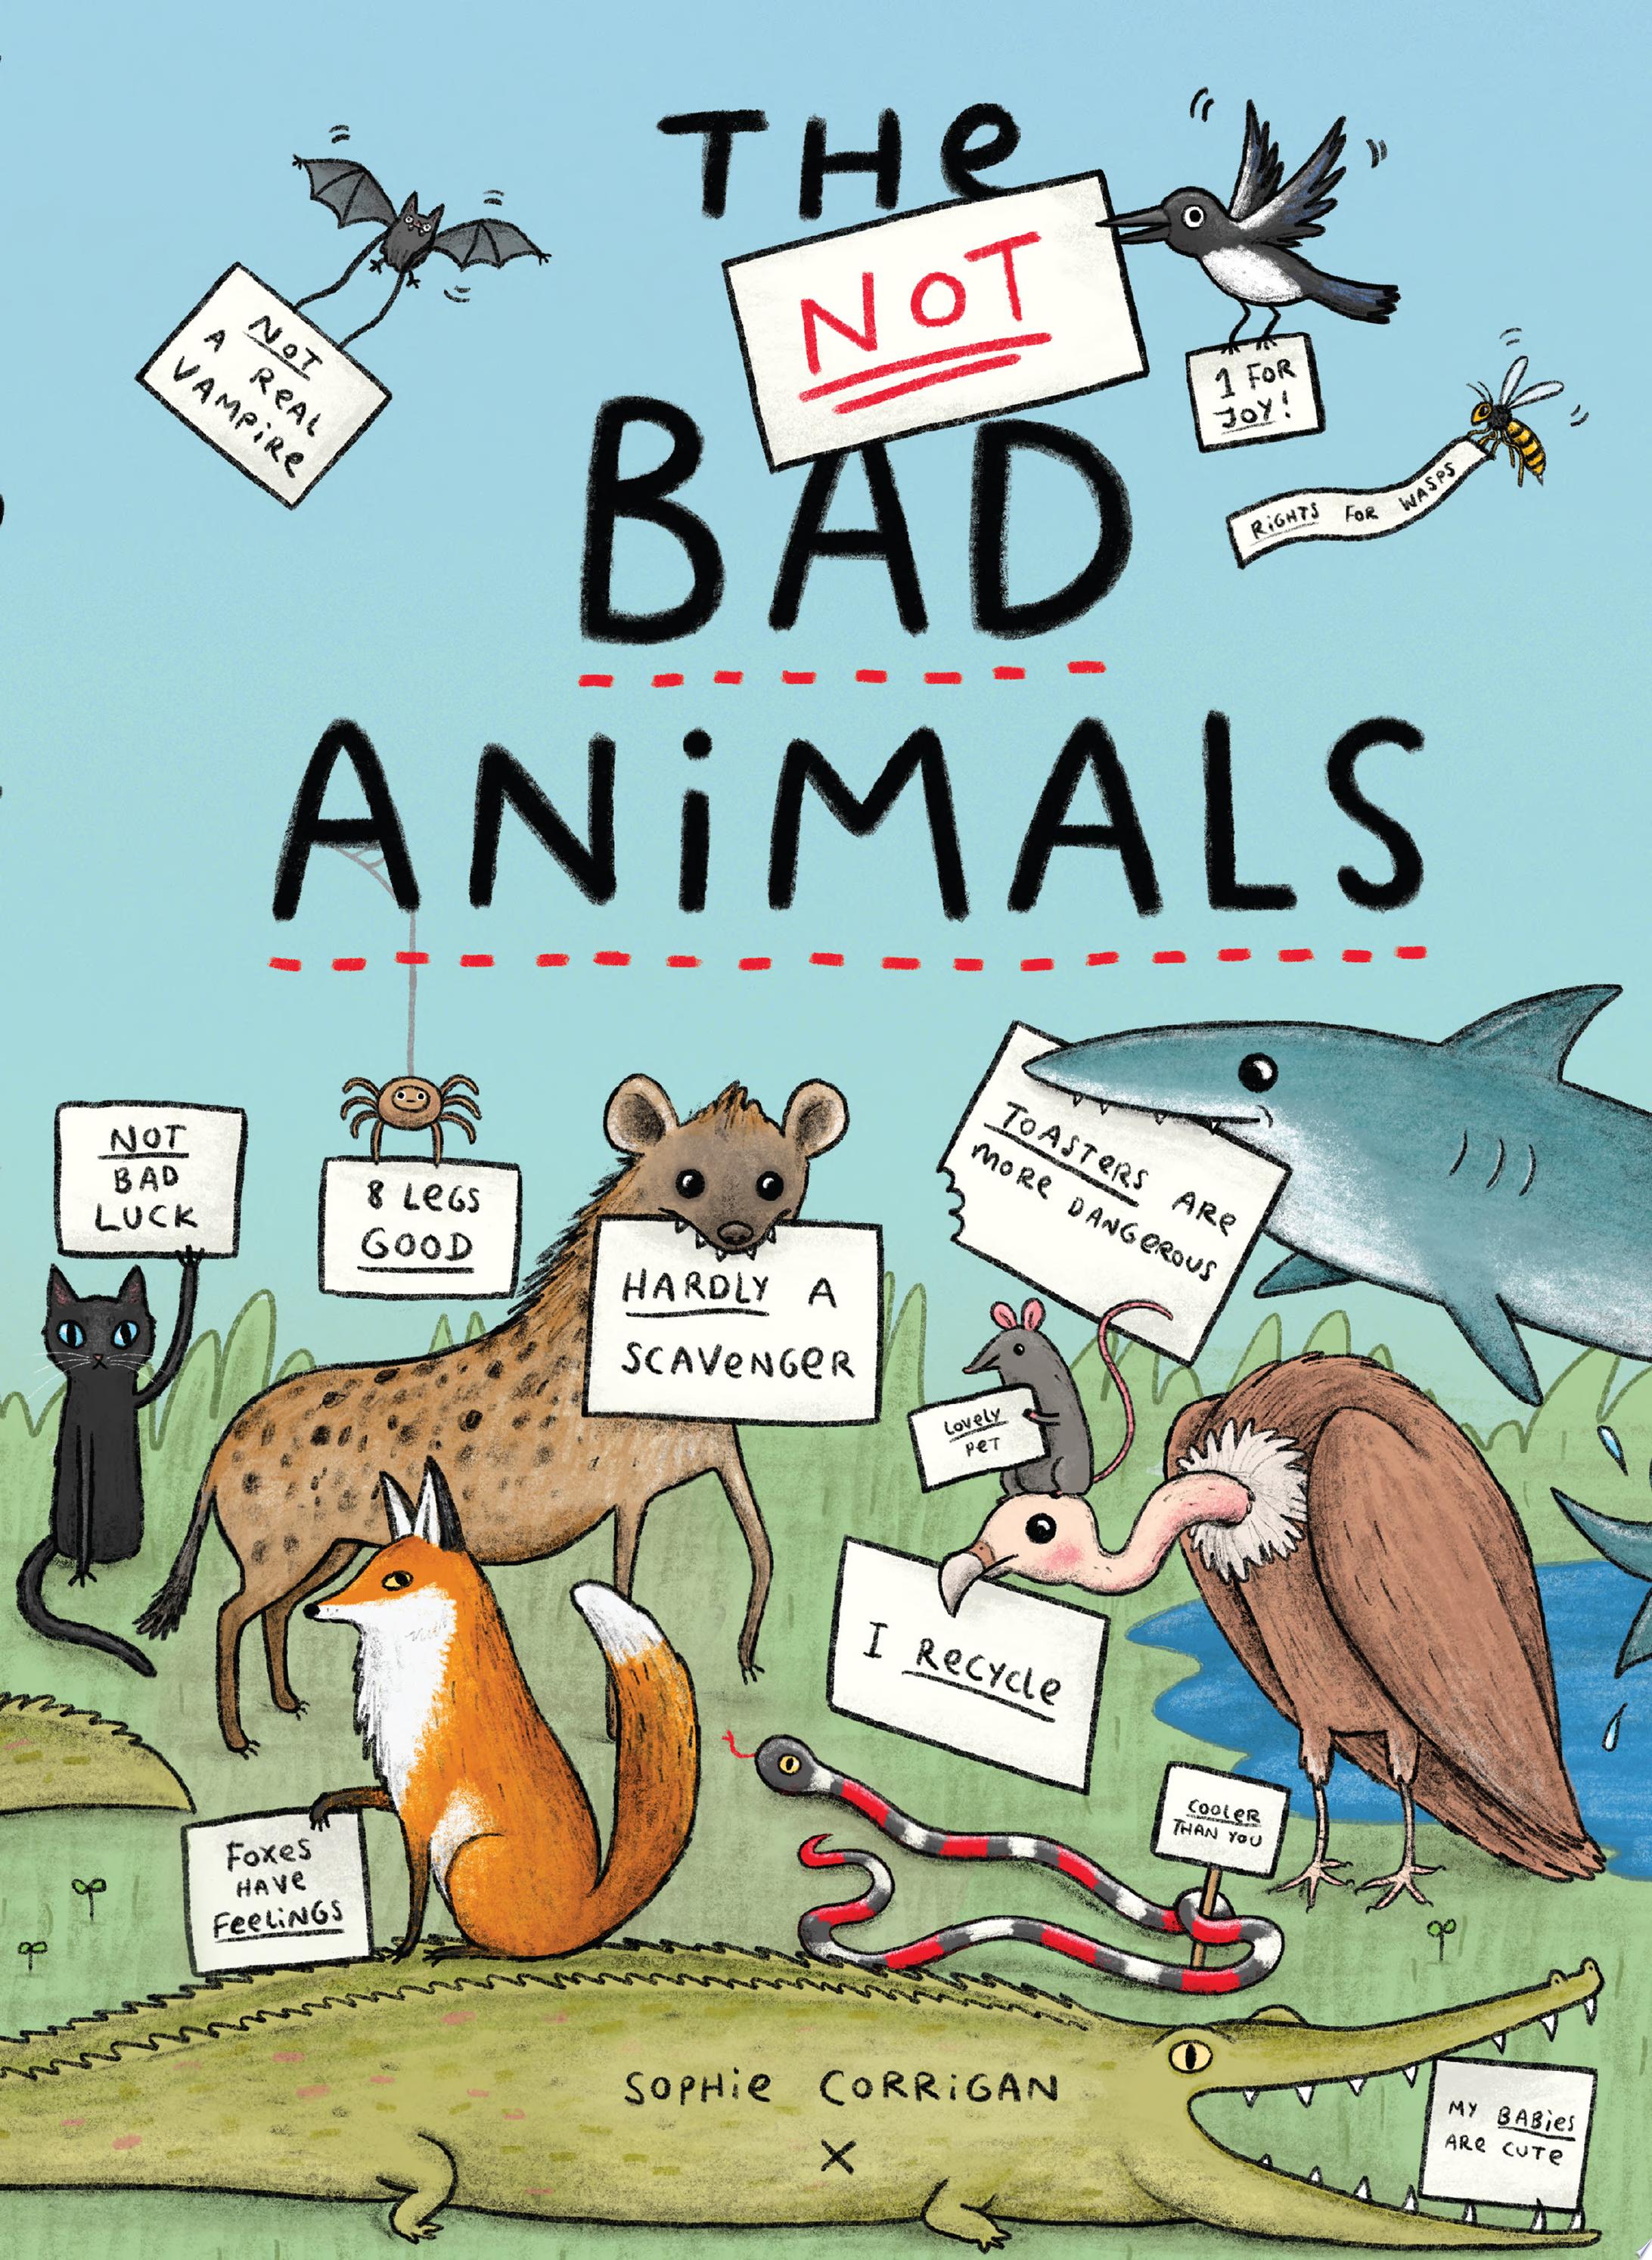 Image for "The Not BAD Animals"